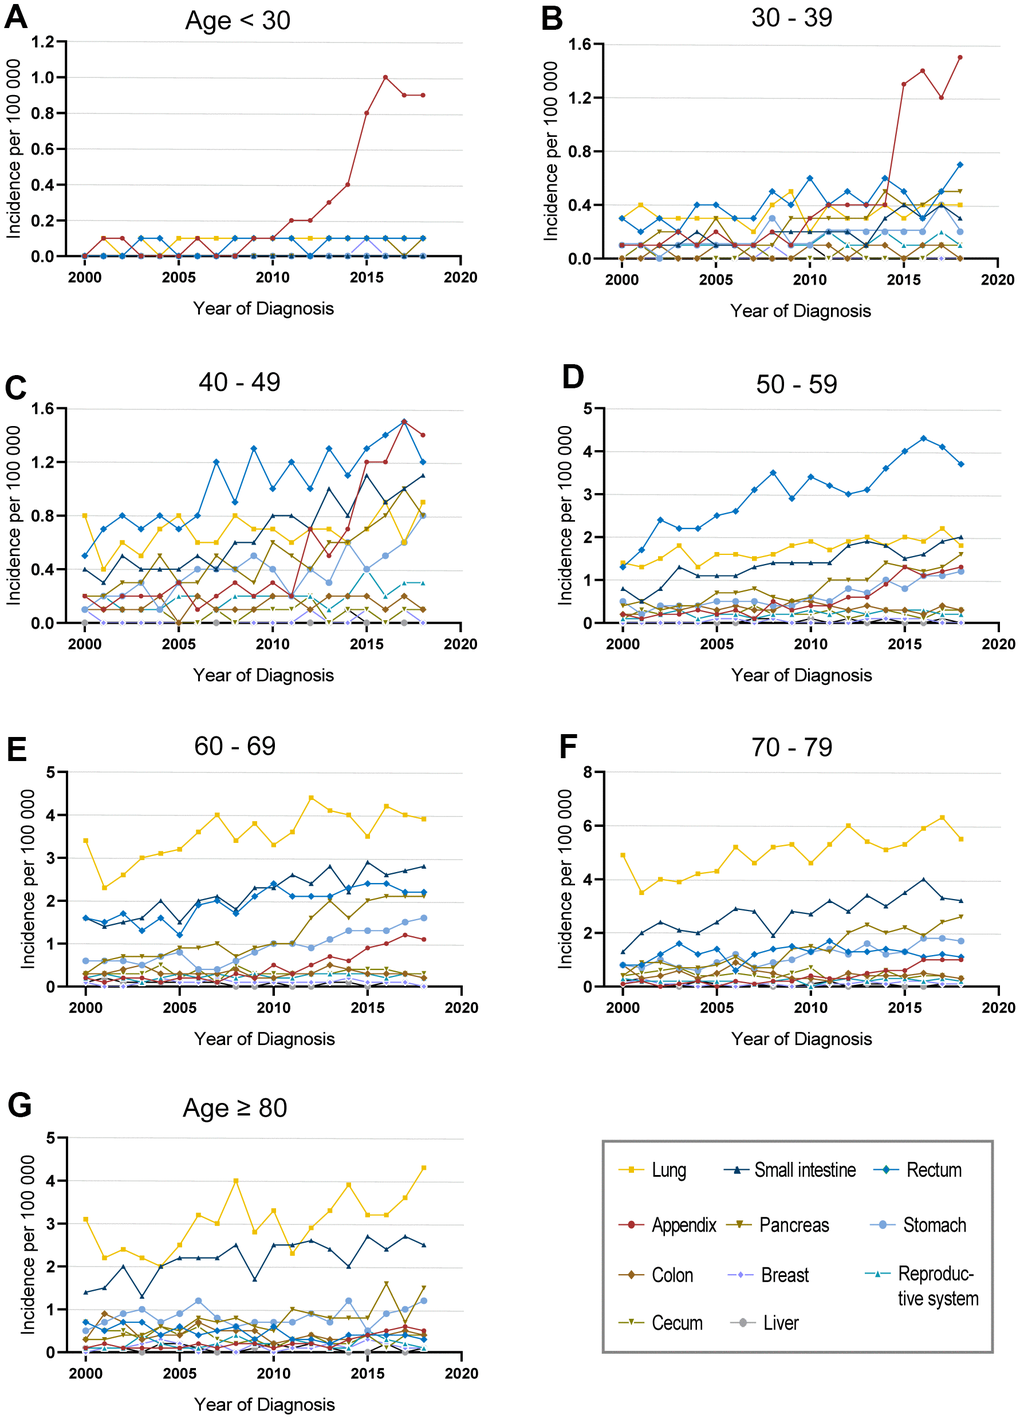 Incidence of female neuroendocrine neoplasms (fNENs) patients with different sites in various age groups. The incidence of fNENs by site in patients younger than 30 years old (A), between 30-39 years old (B), between 40-49 years old (C), between 50-59 years old (D), between 60-69 years old (E), between 70-79 years old (F) and over 80 years old (G).